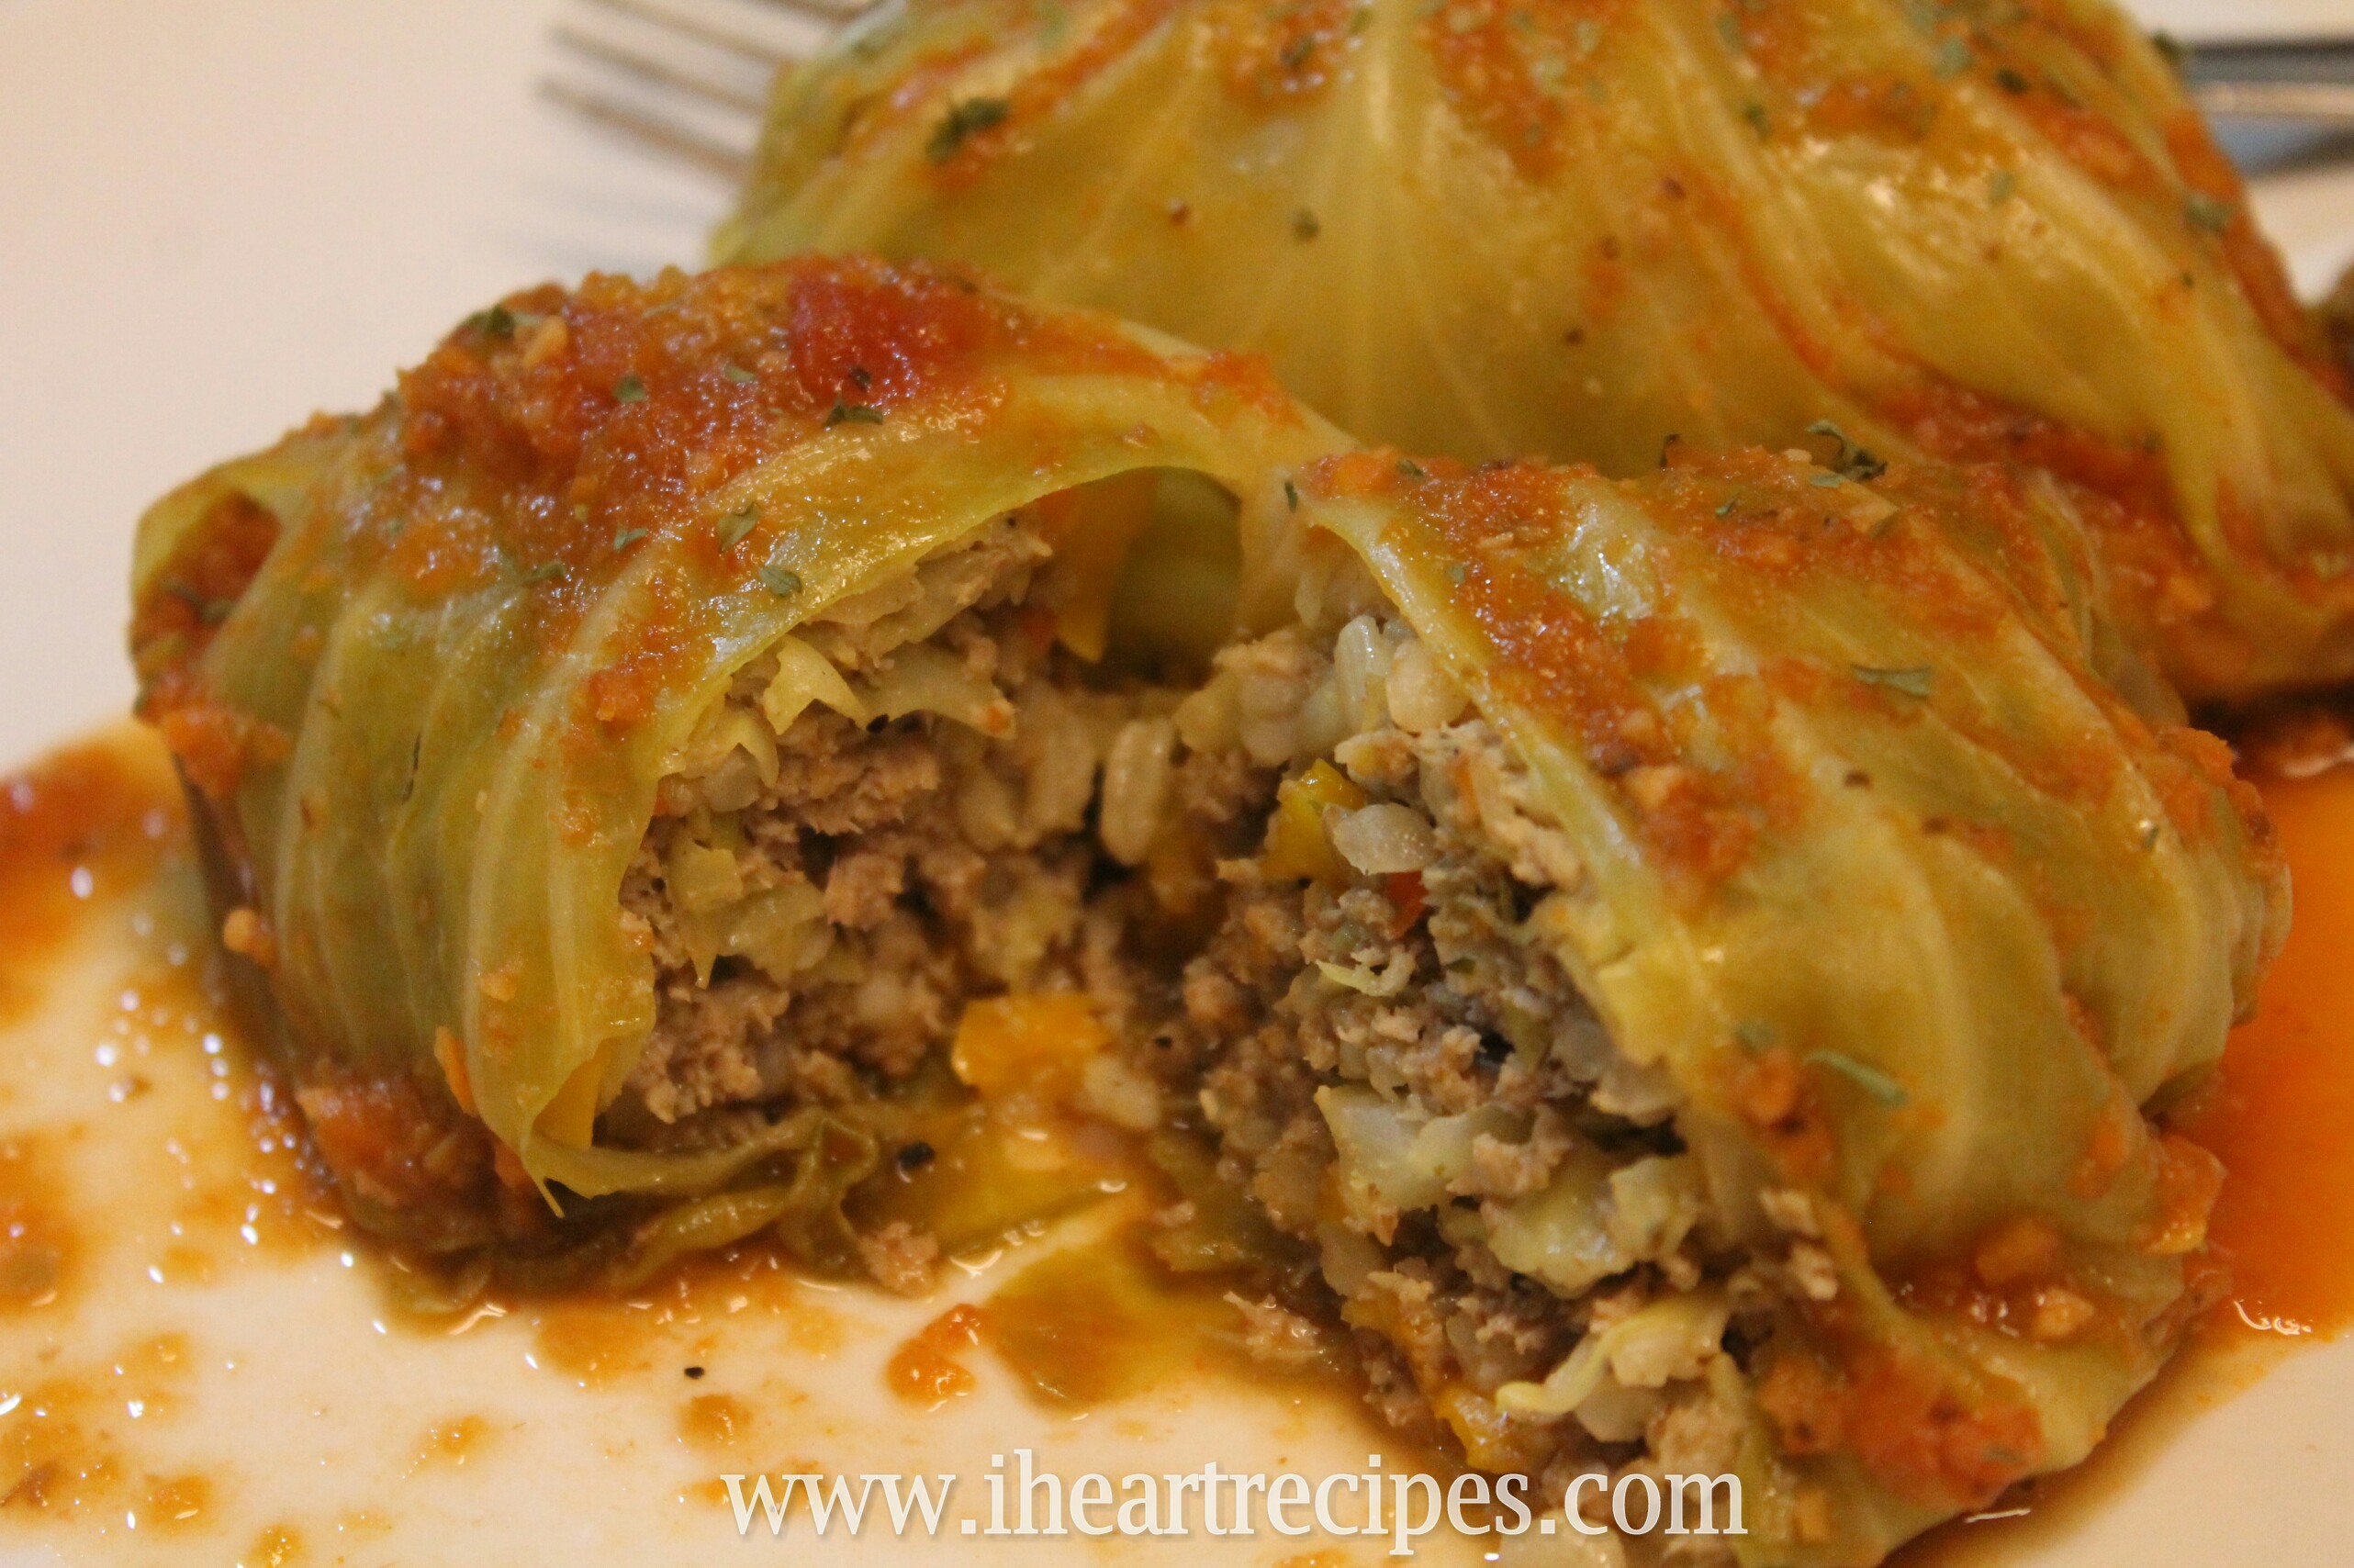 Delicious stuffed cabbage rolls are a simple, hearty dinner that's easy to make